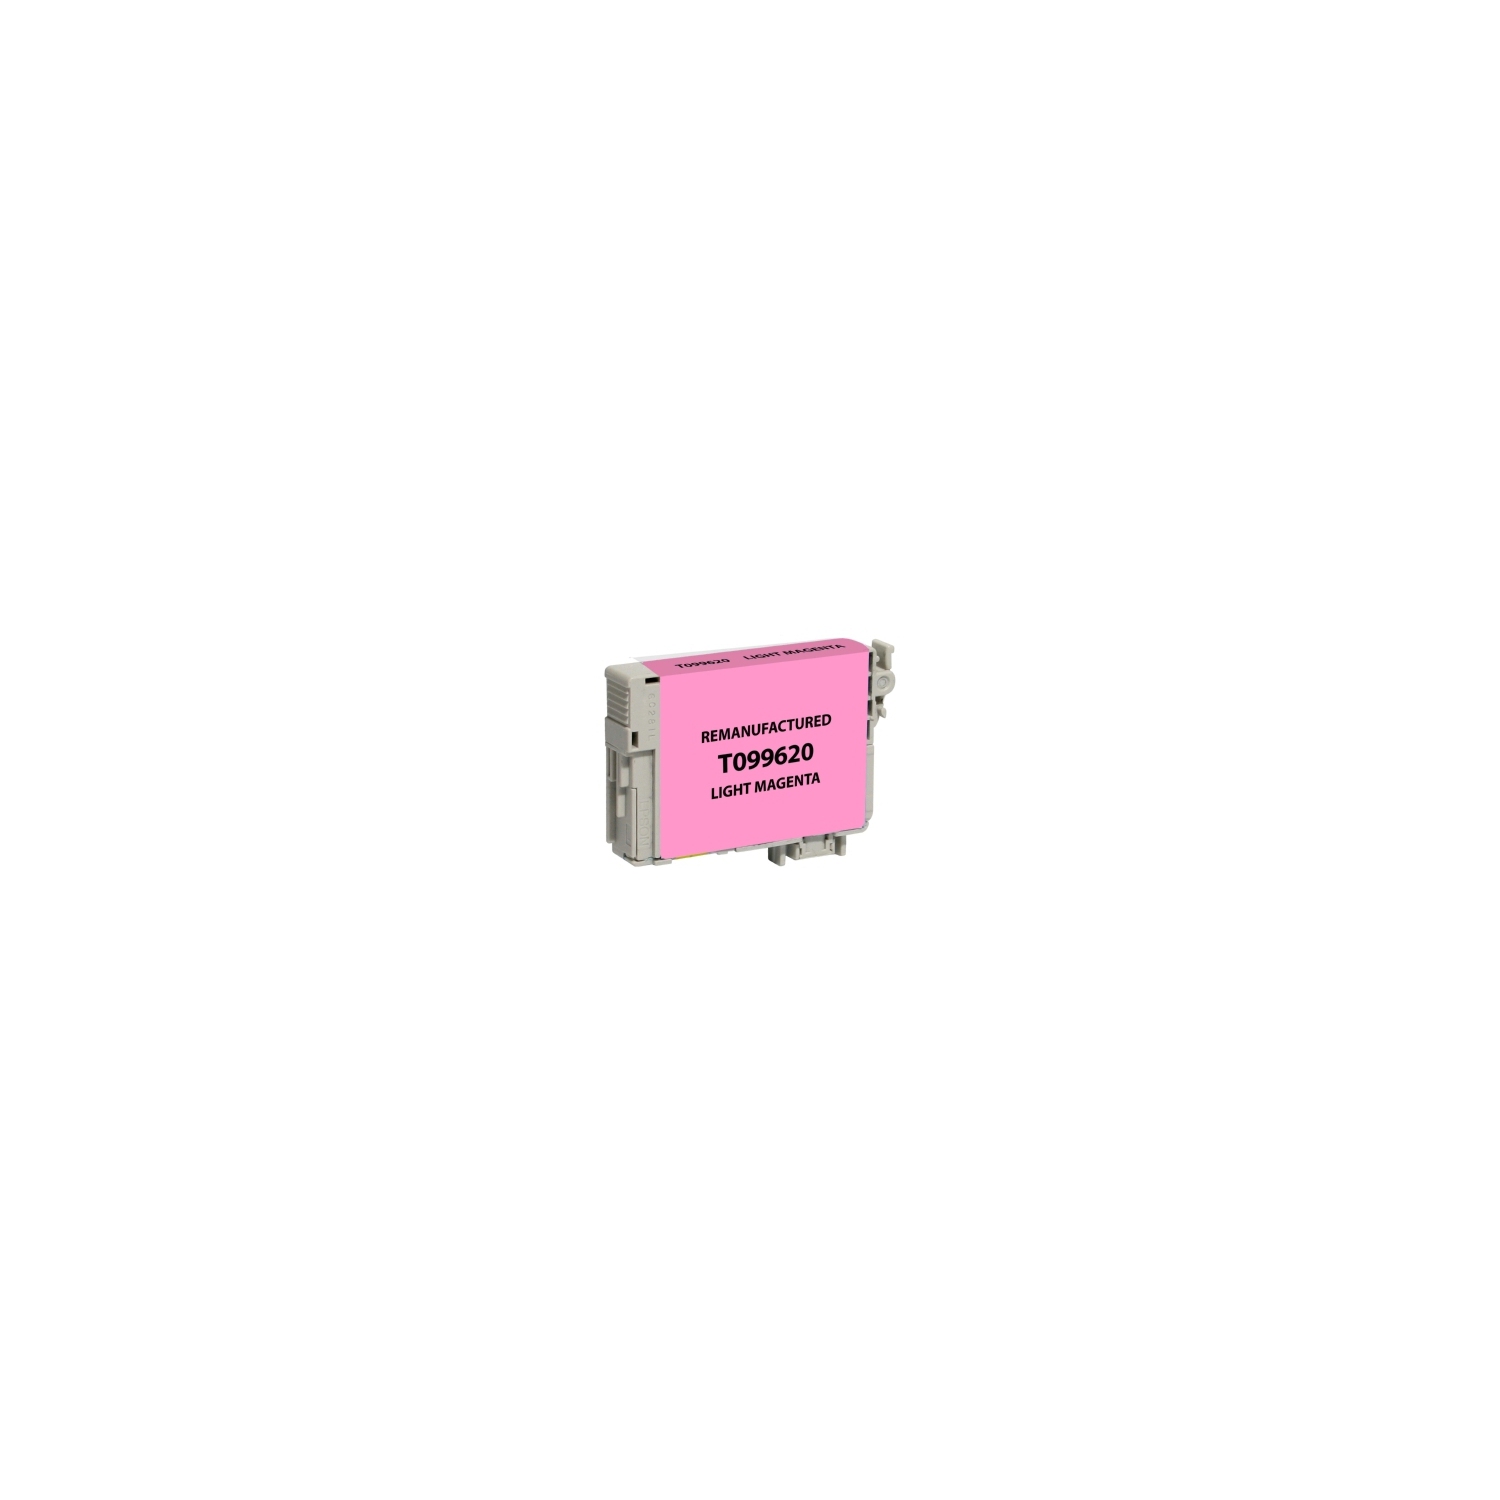 Ink House Compatible Epson T099620 Light Magenta Inkjet Cartridge for use in Artisan 700 710 725 730 800 810 835 837